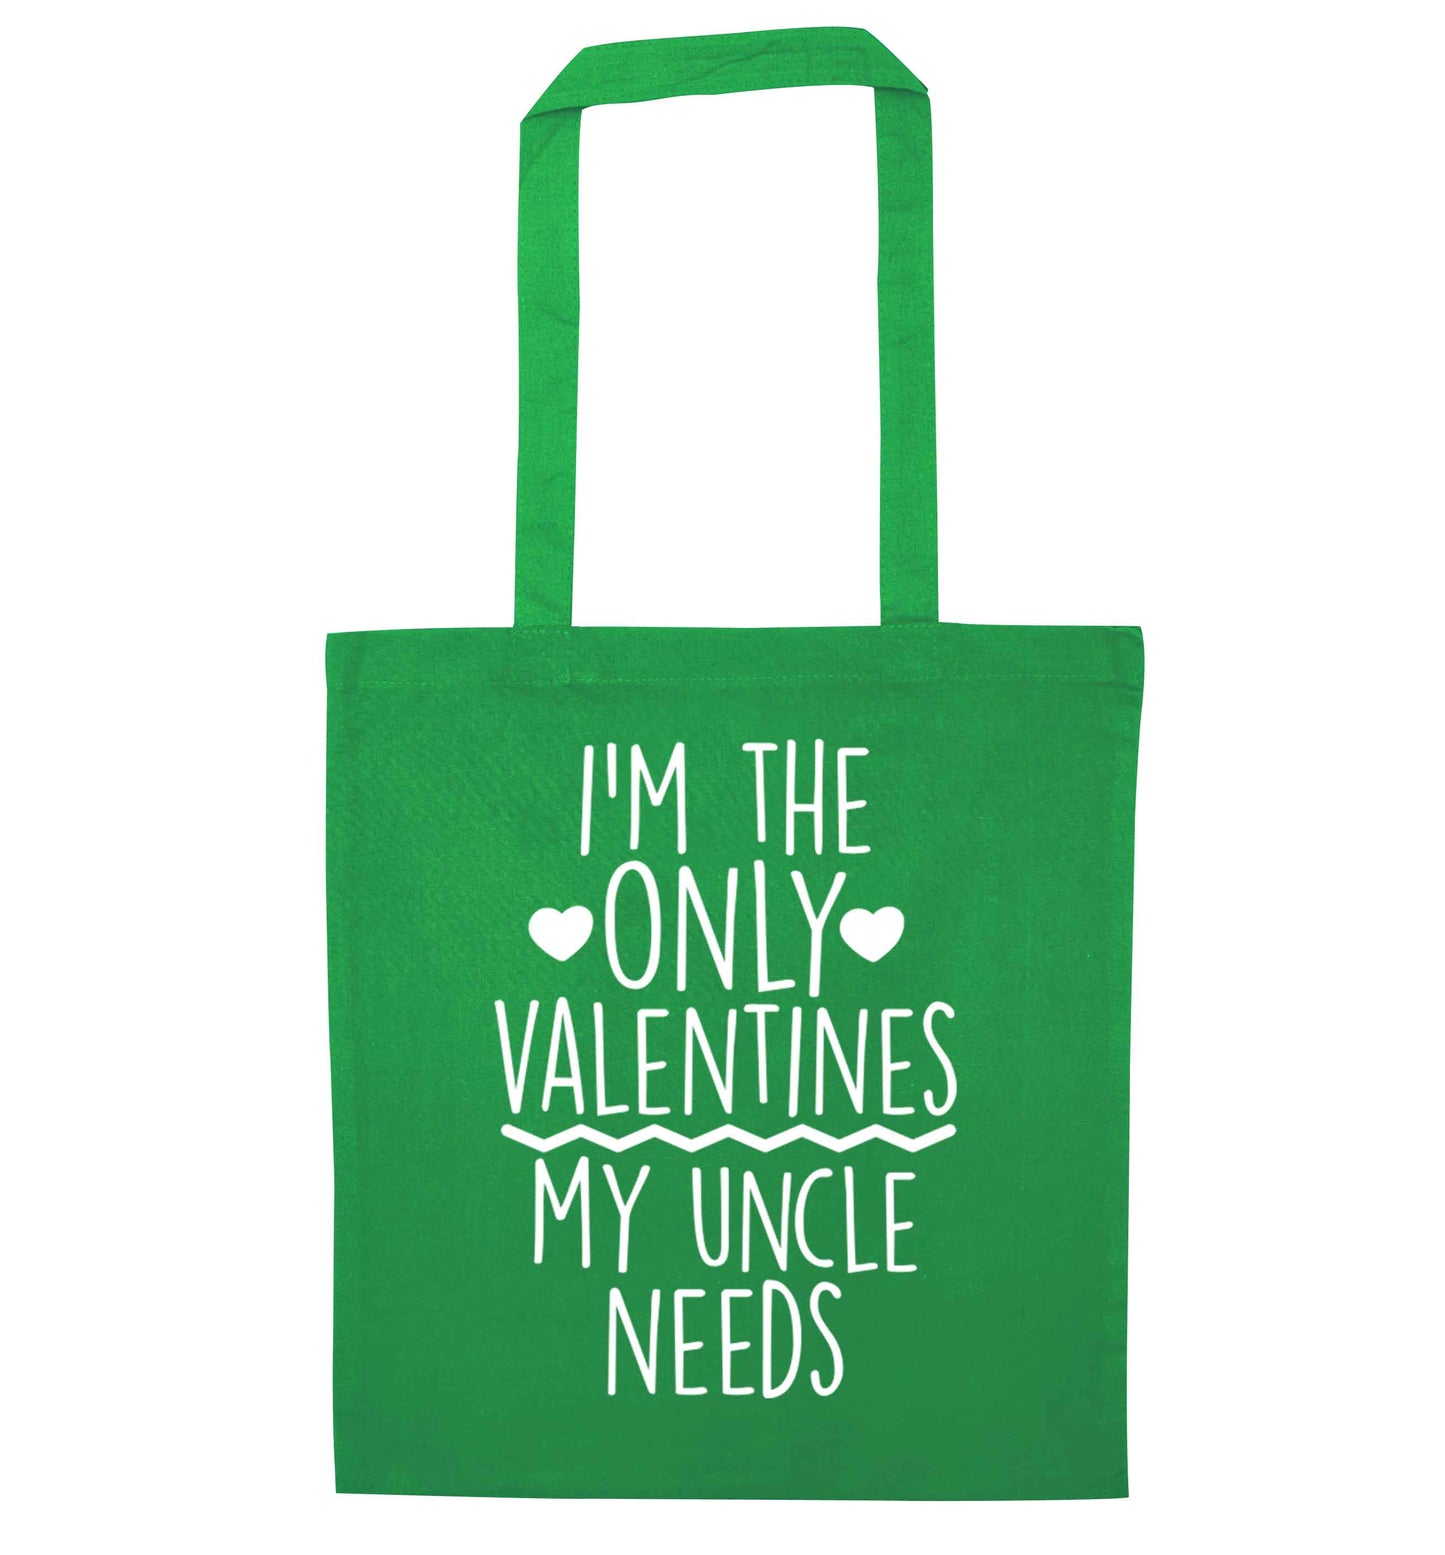 I'm the only valentines my uncle needs green tote bag